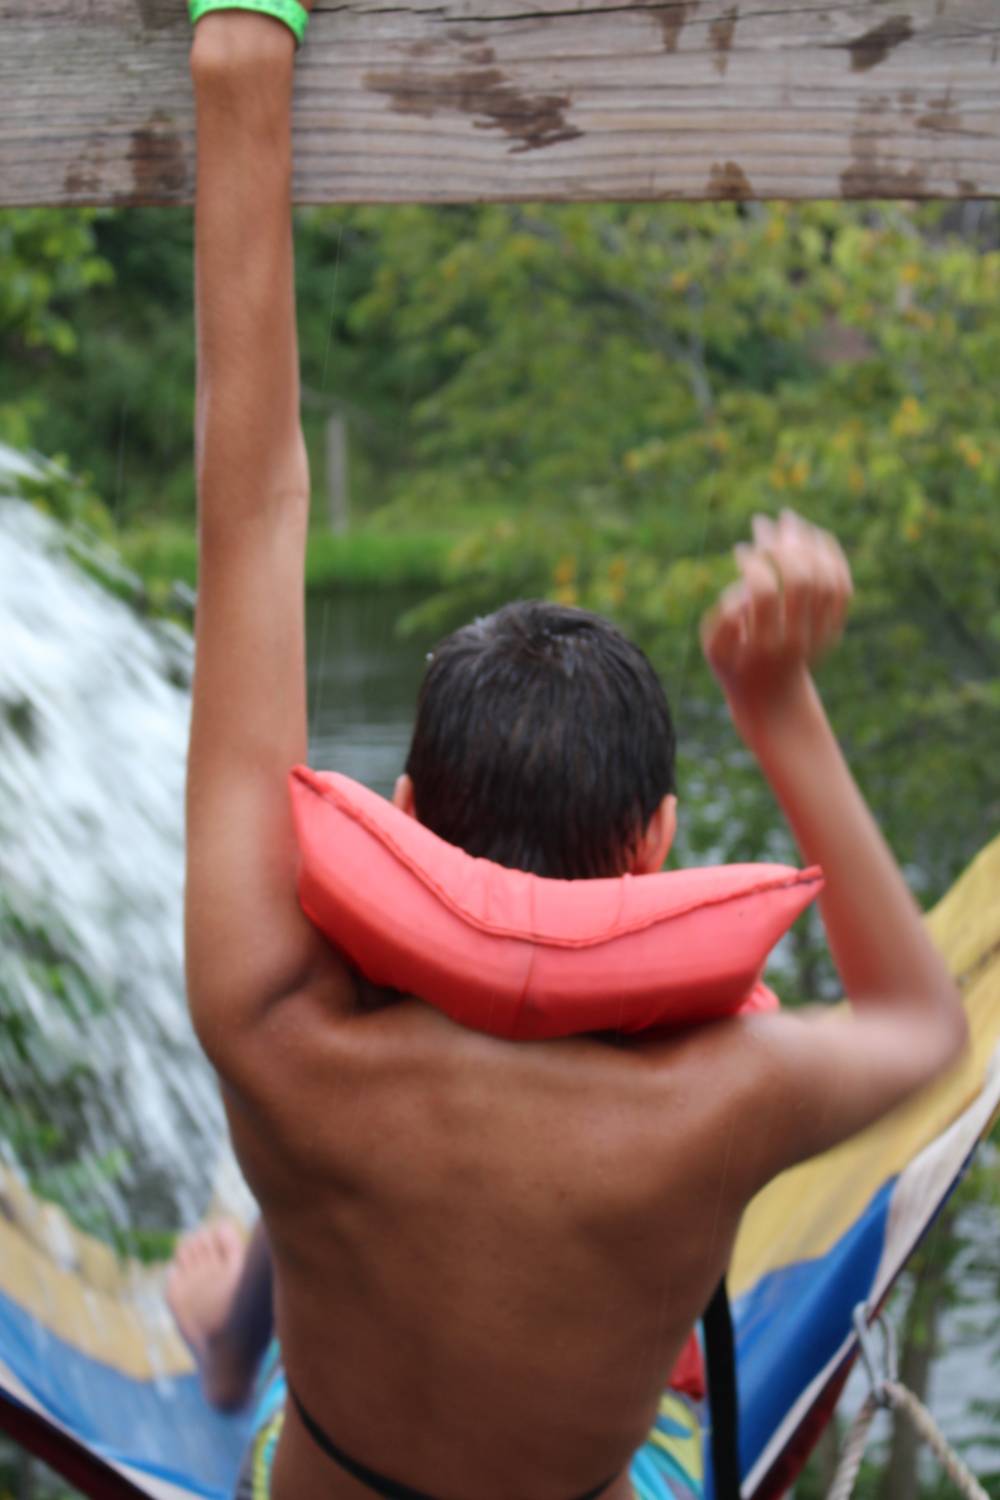 TOP PENNSYLVANIA SWIM CAMP: Summer LIFE is a Top Swim Summer Camp located in Scwenksville Pennsylvania offering many fun and enriching Swim and other camp programs. 